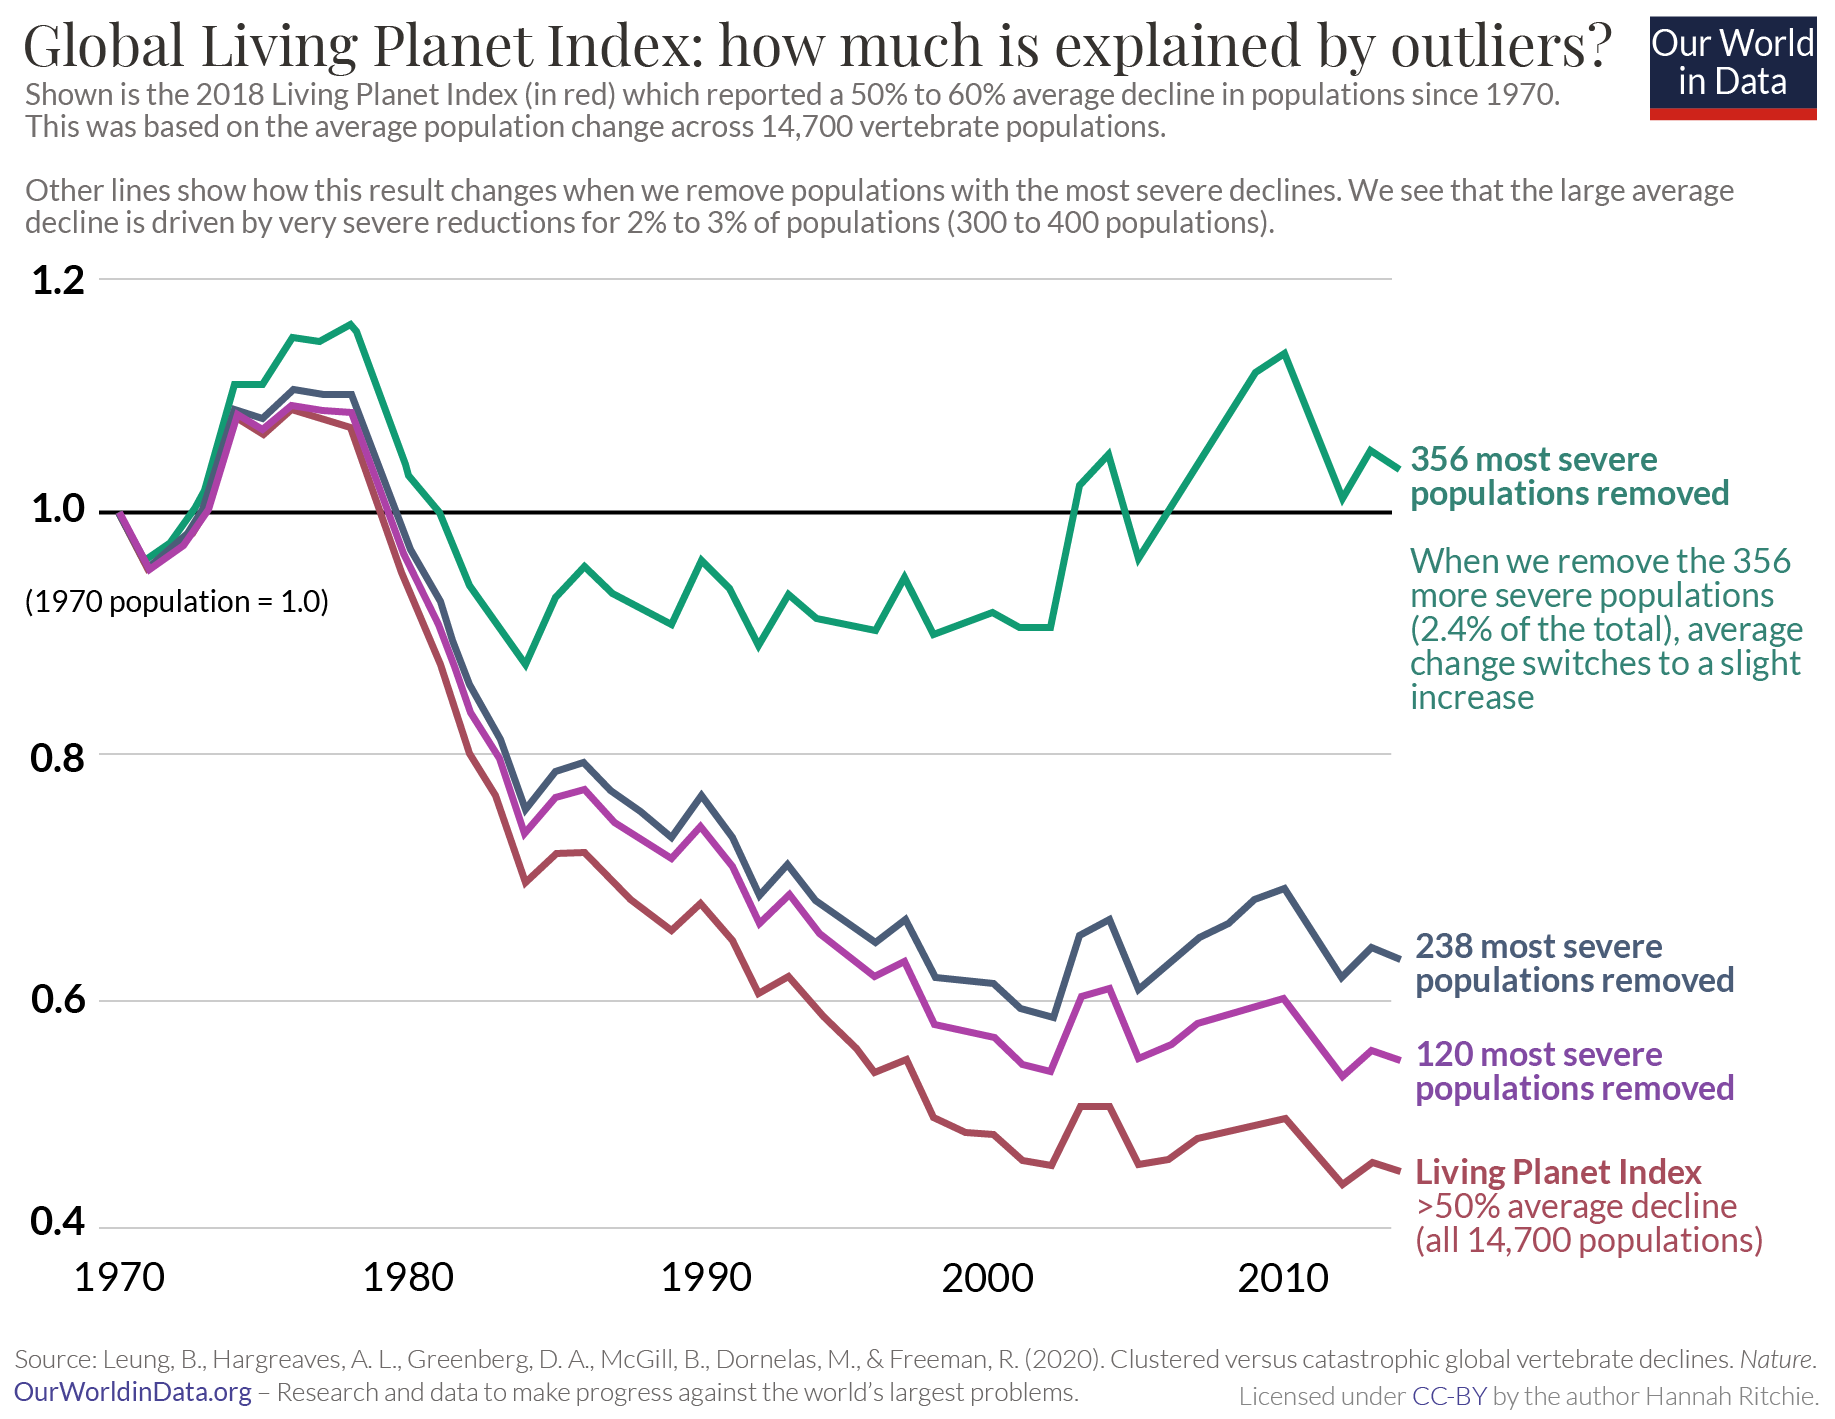 Impact of extremes on living planet index